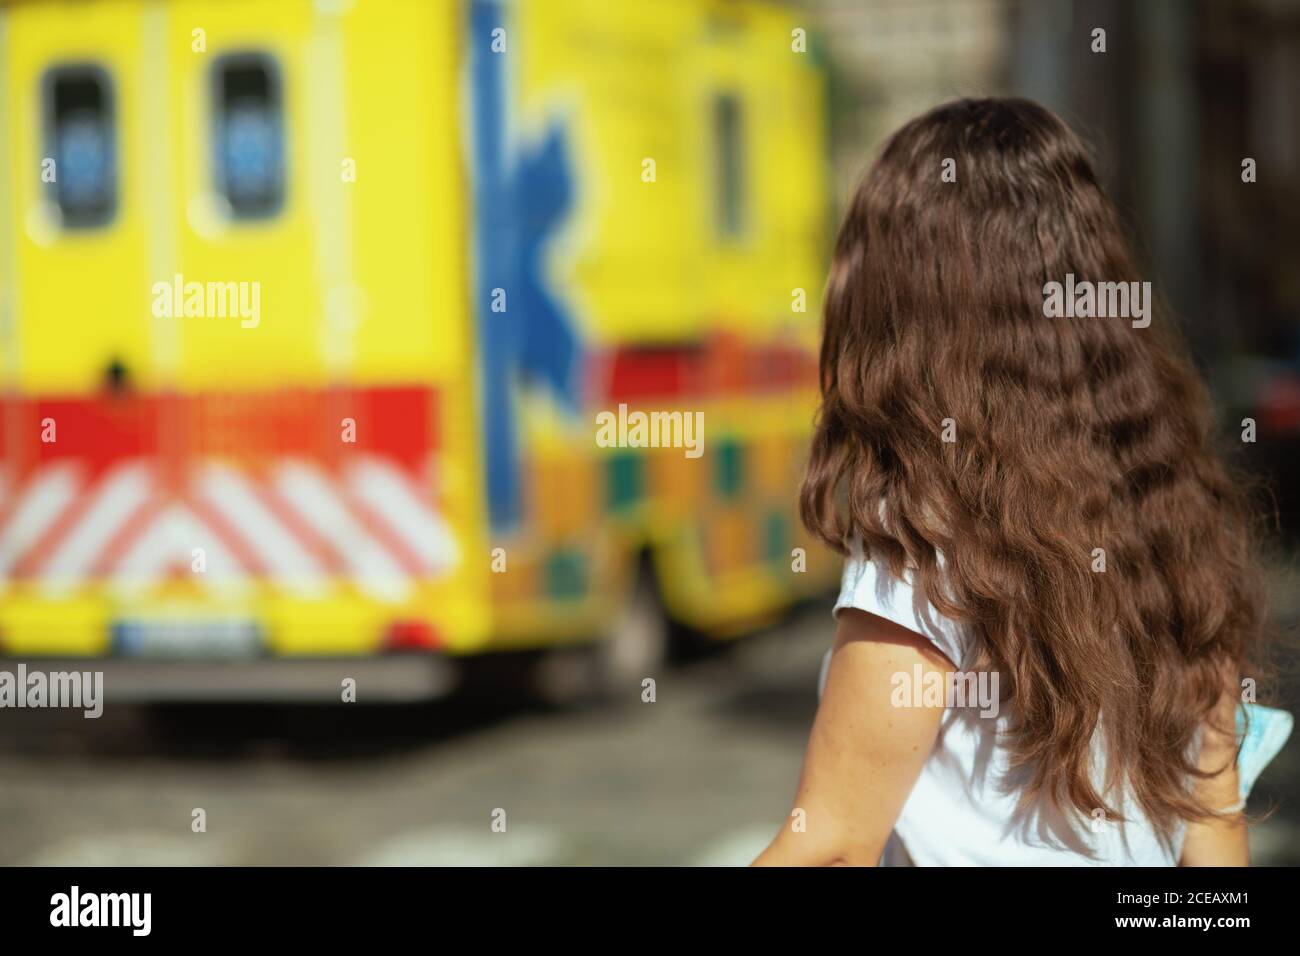 covid-19 pandemic. Seen from behind young female outdoors near ambulance. Stock Photo